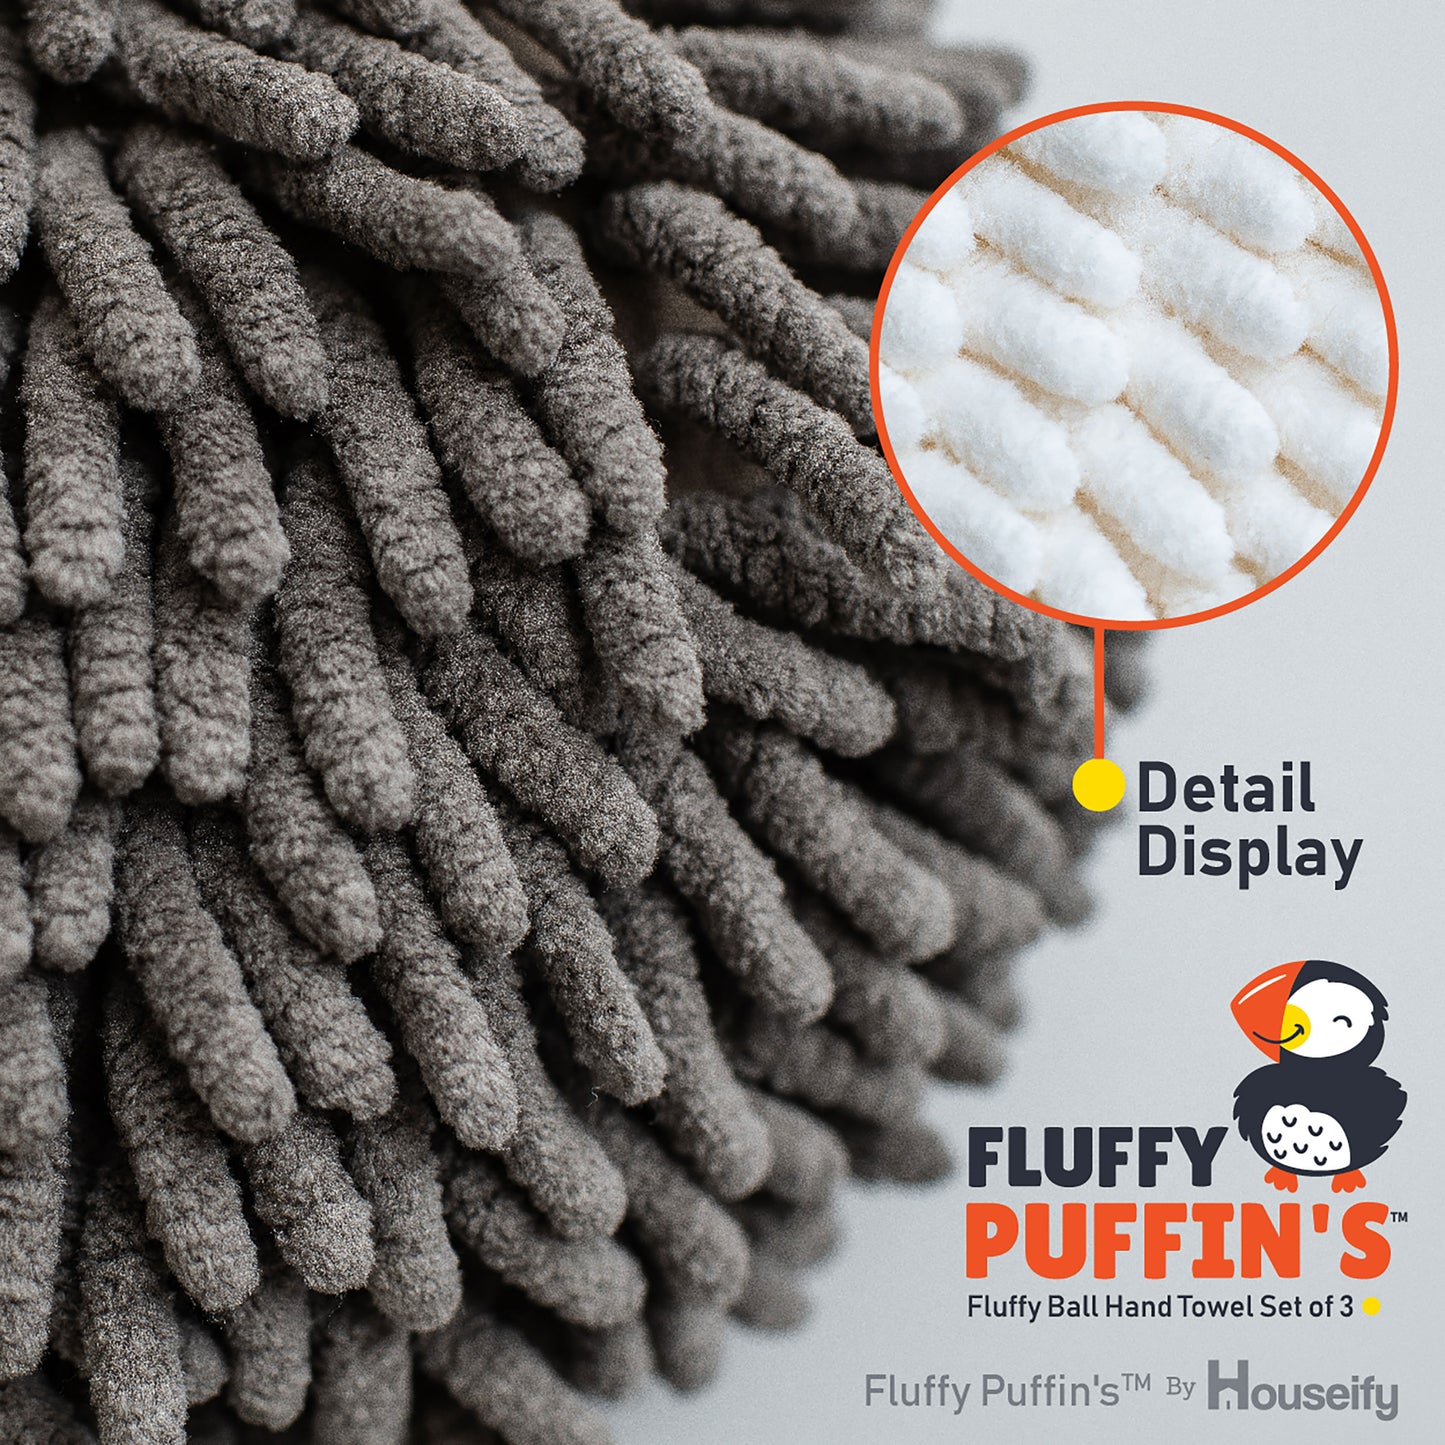 Fluffy Puffin's Fluff Ball Hand Towels, Set of Three, with Wall Hook Attachments